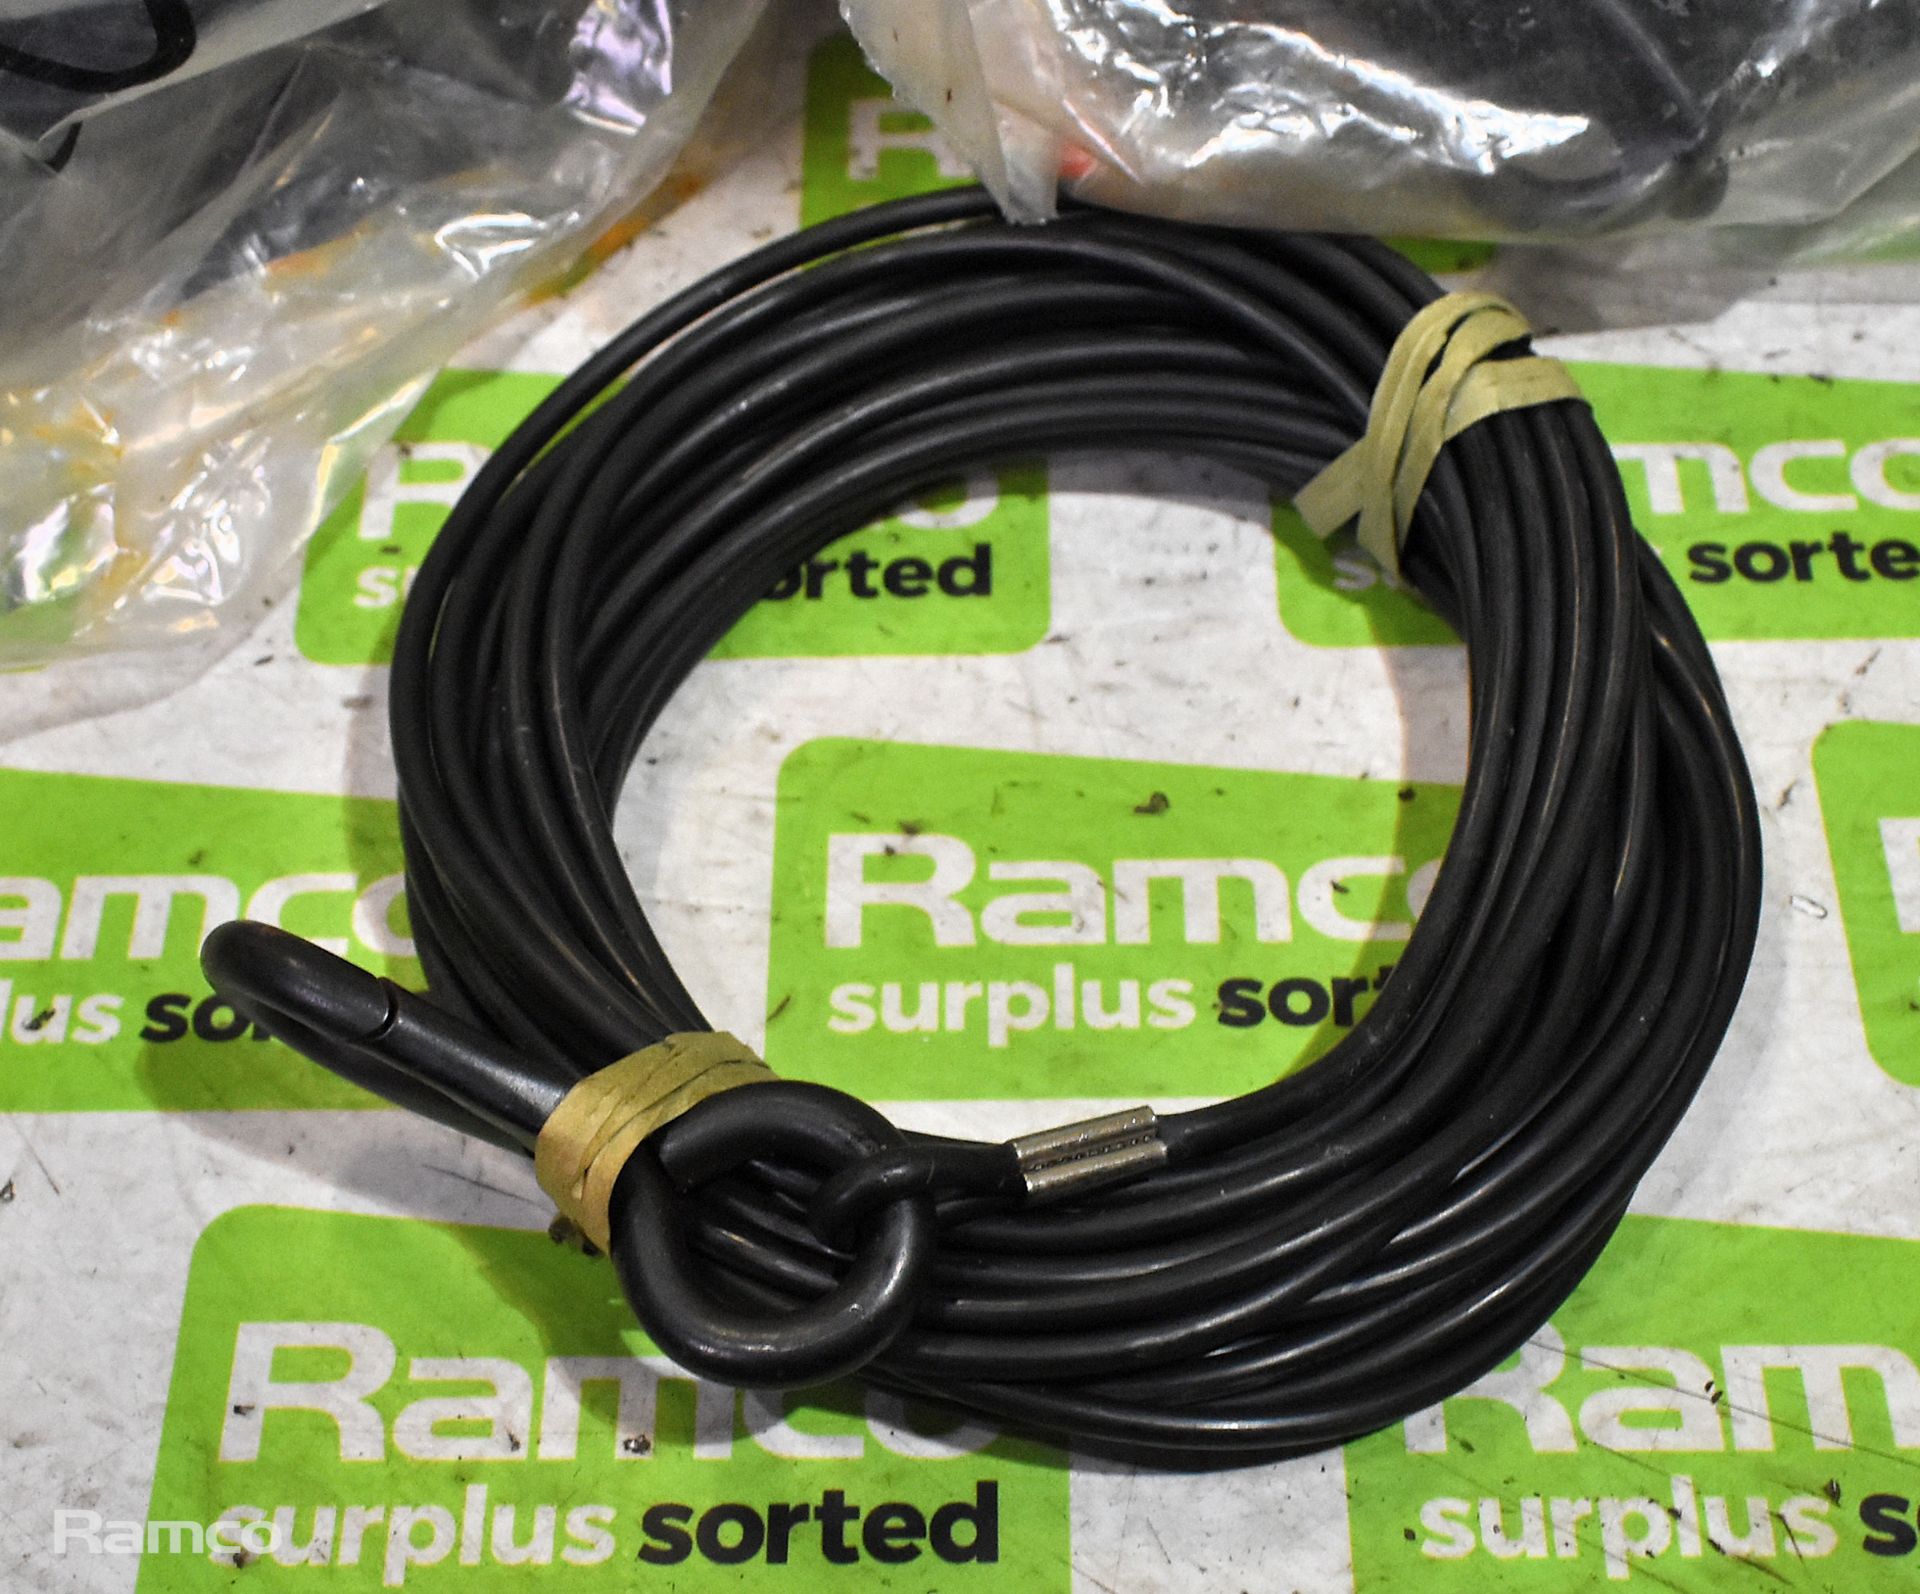 Box of army 240V adaptor cables, heavy comms cable and 2 bags of shelter tensioners - Image 11 of 11